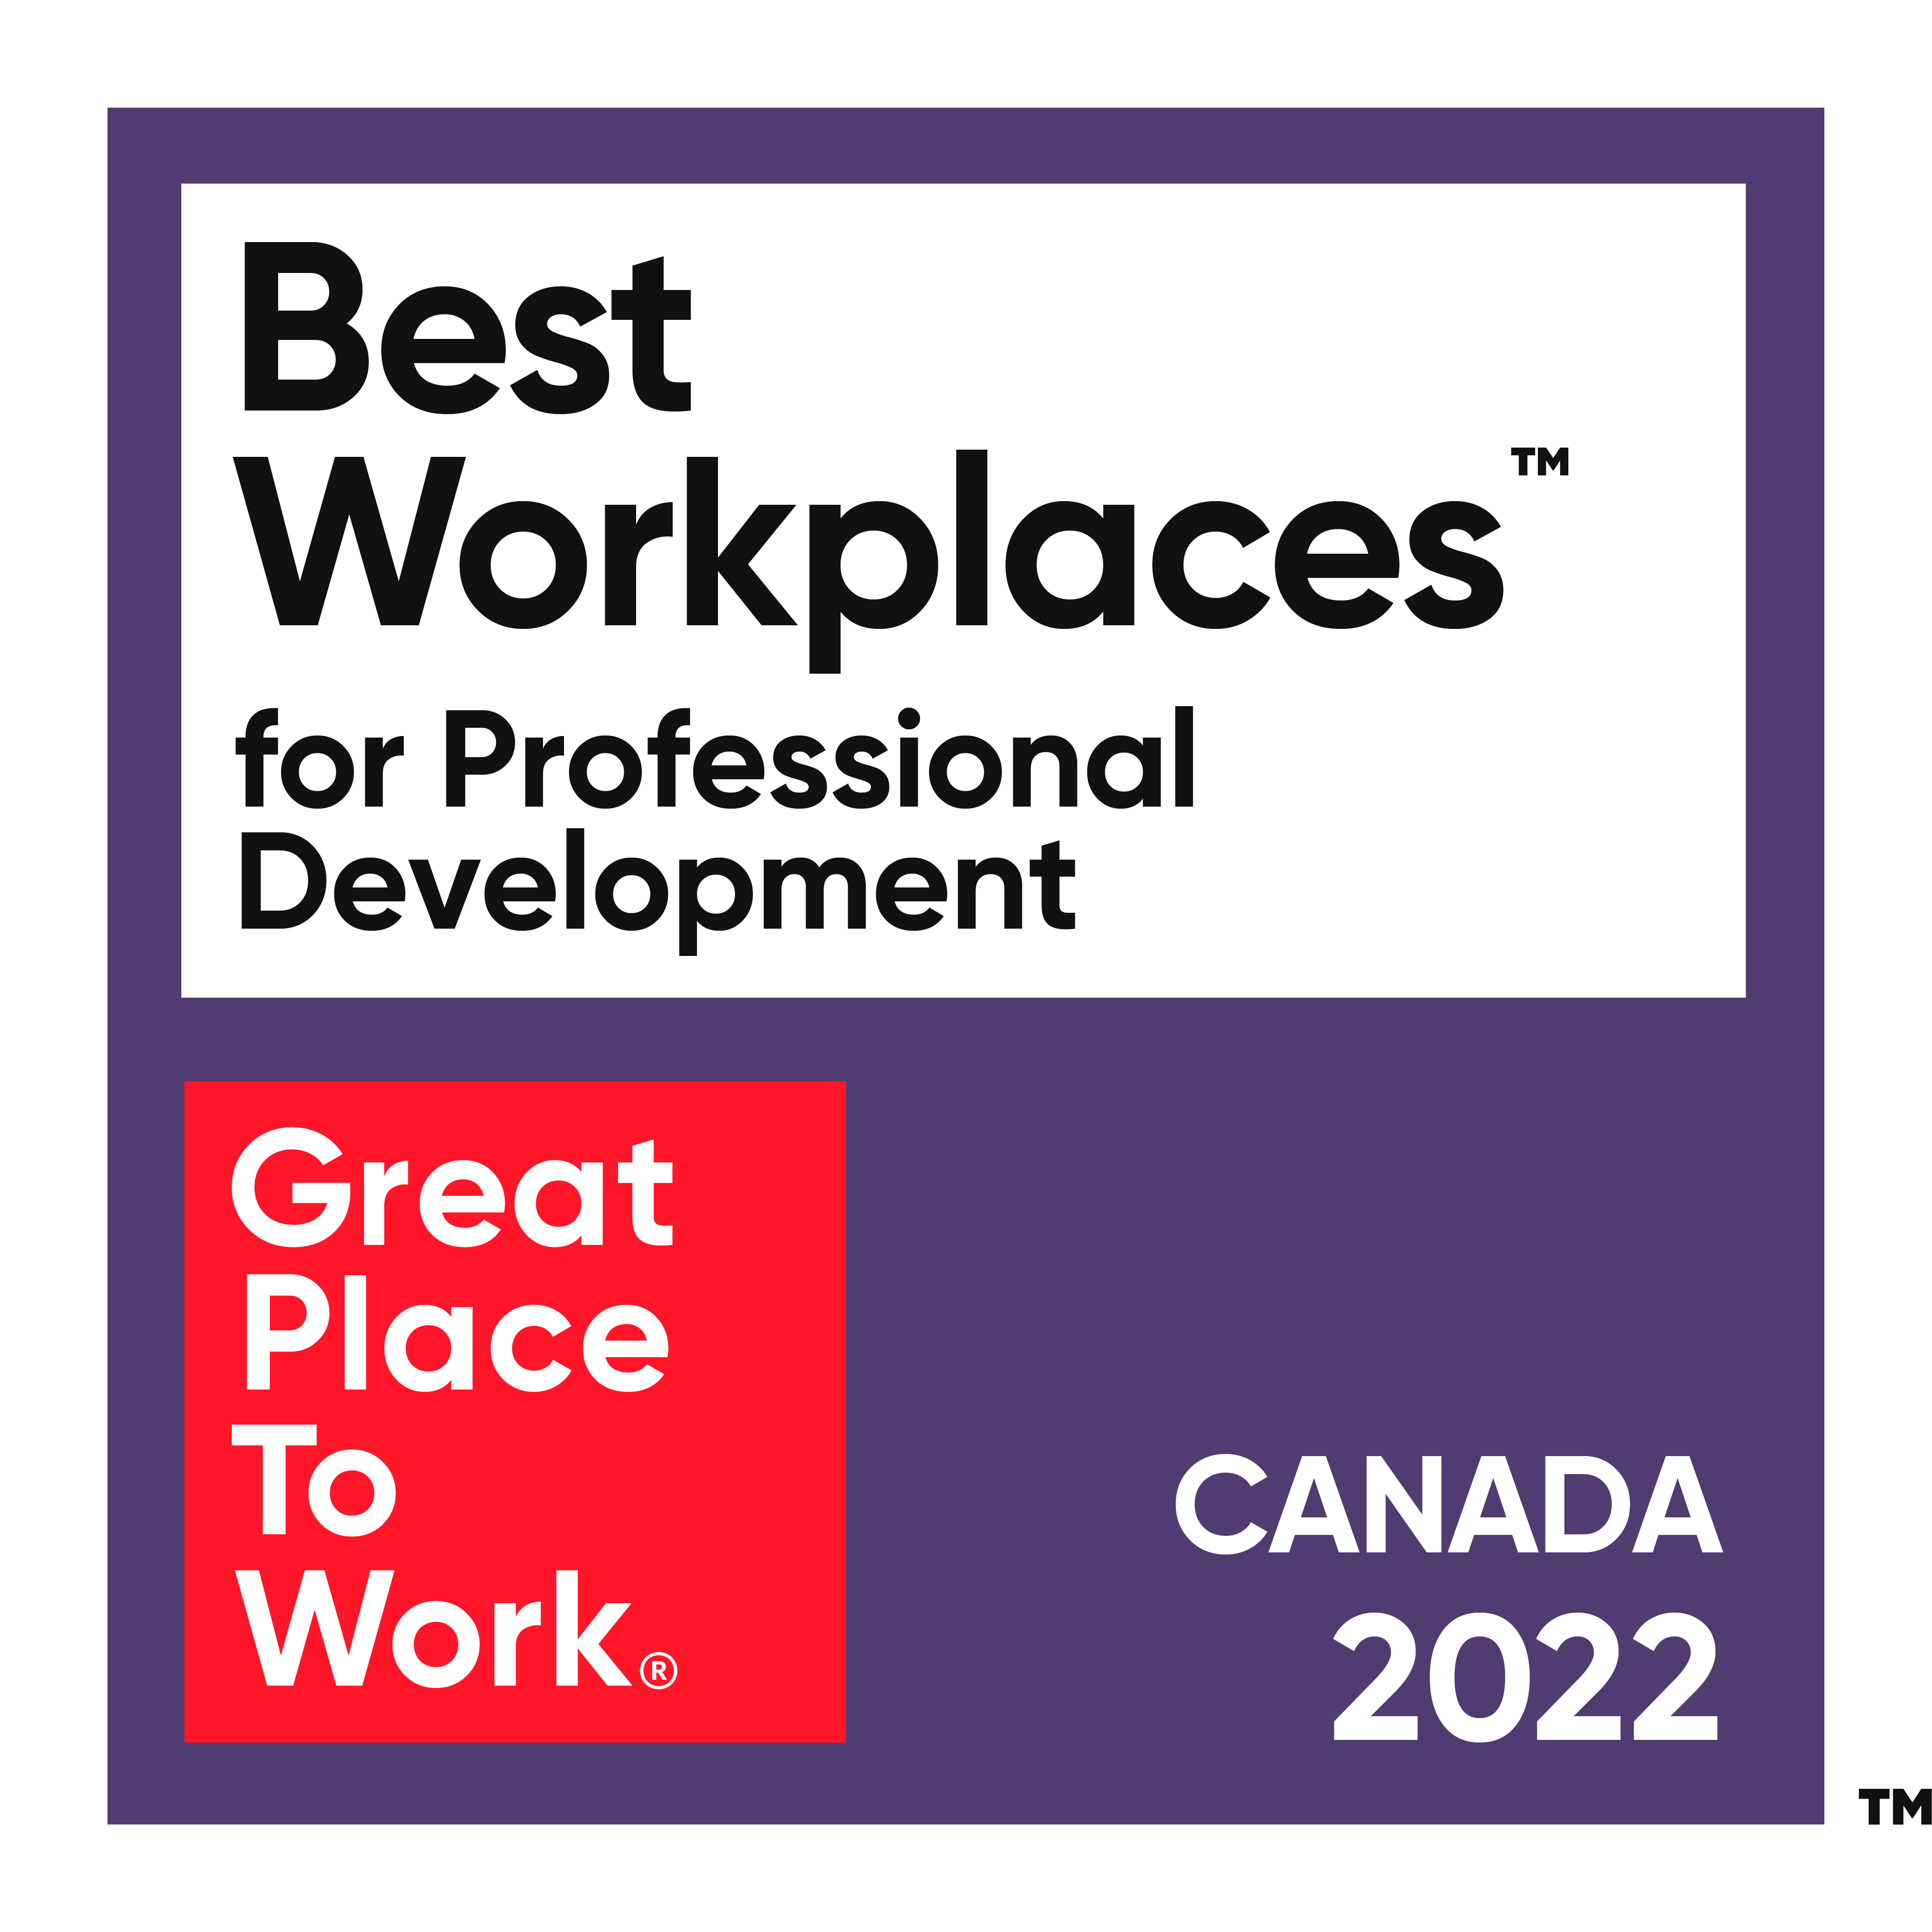 Best Workplaces for Professional Development Canada 2022